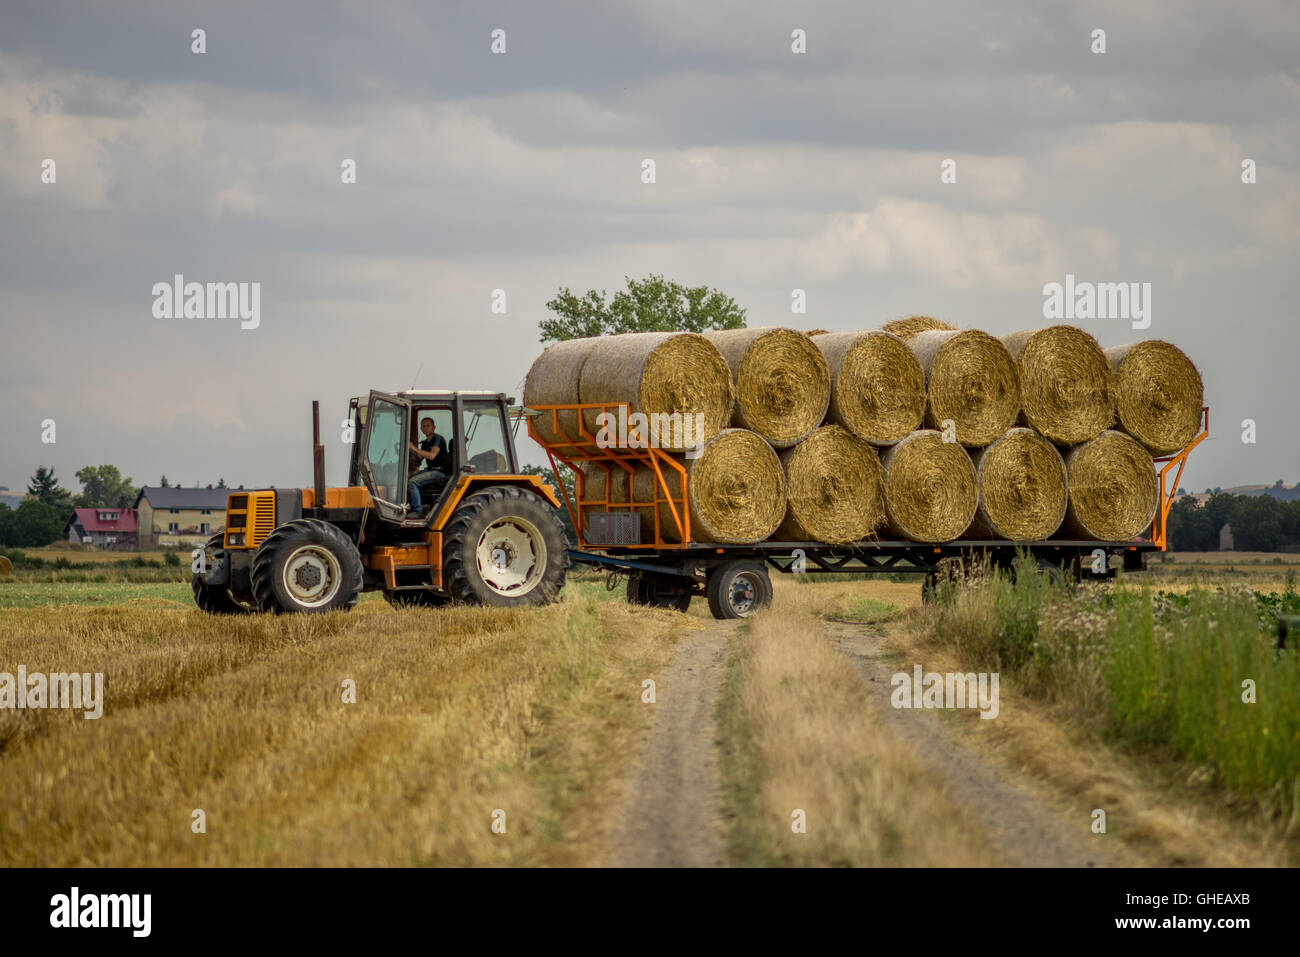 Tractor with a trailer full of straw bales Lower Silesia Poland Stock Photo